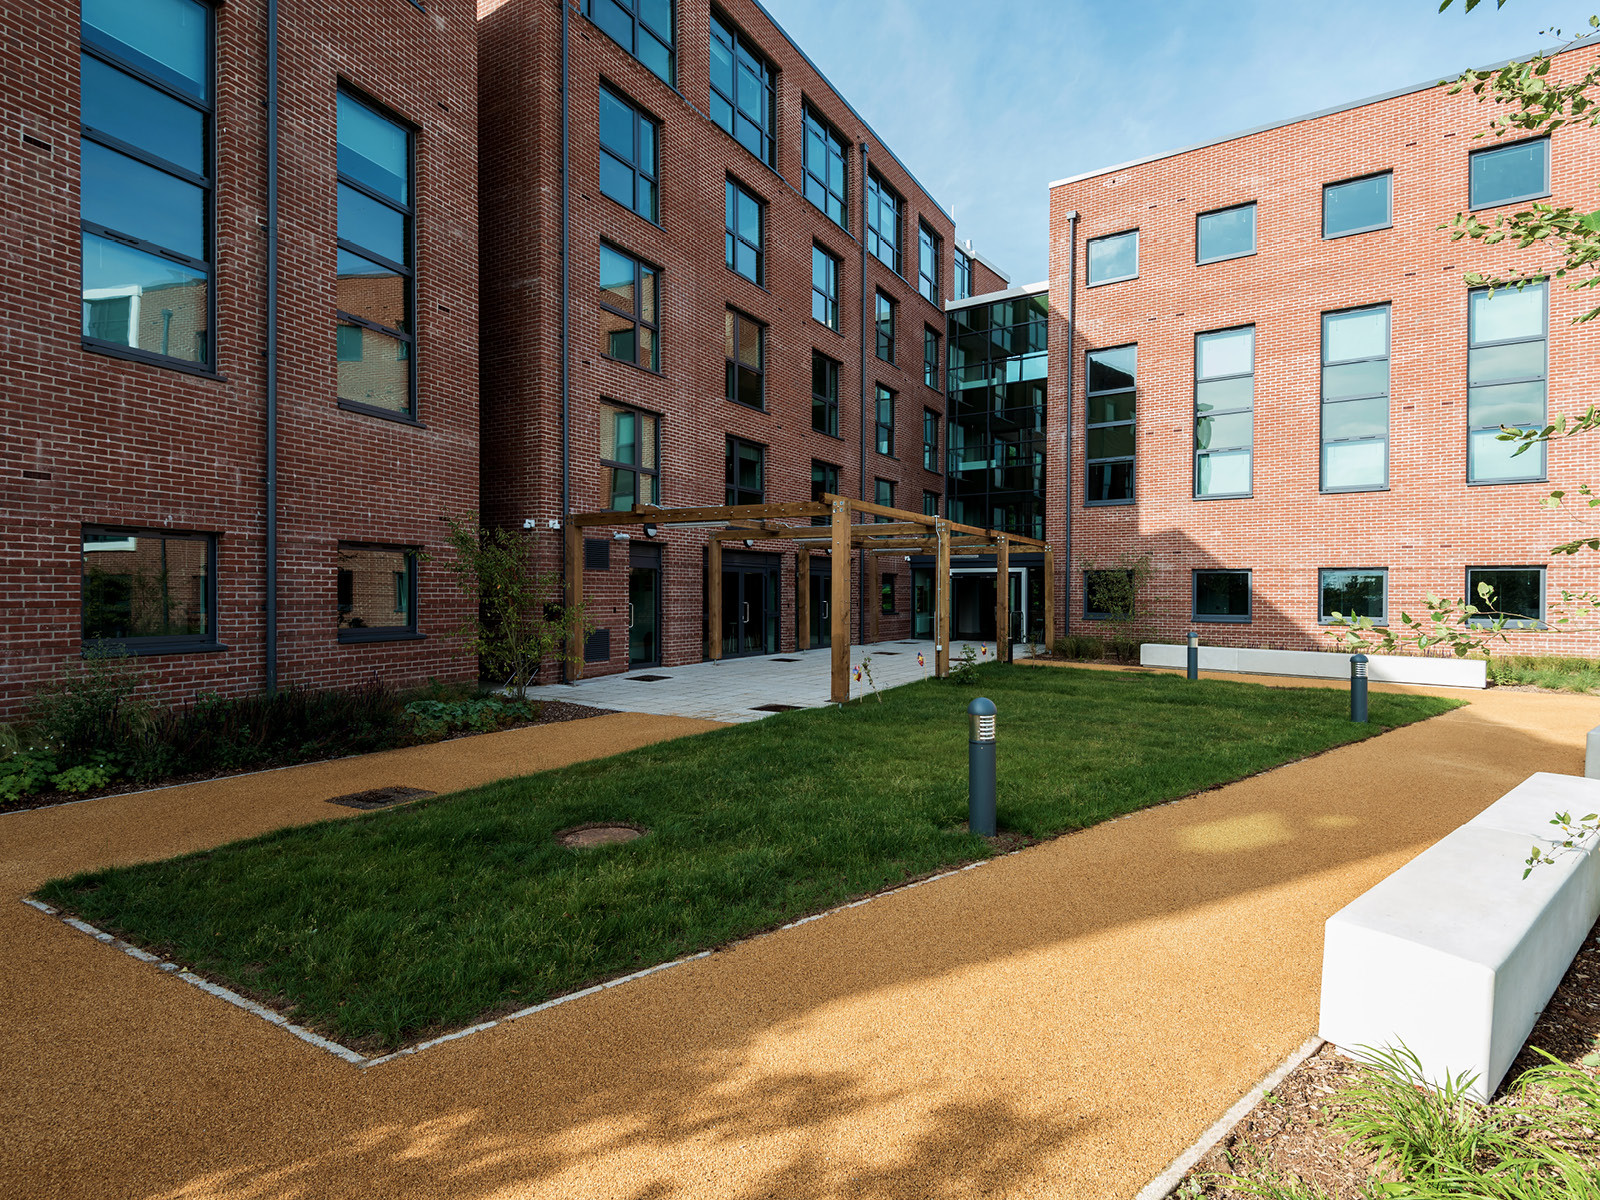 Cricket Field Court Student Accommodation Exeter